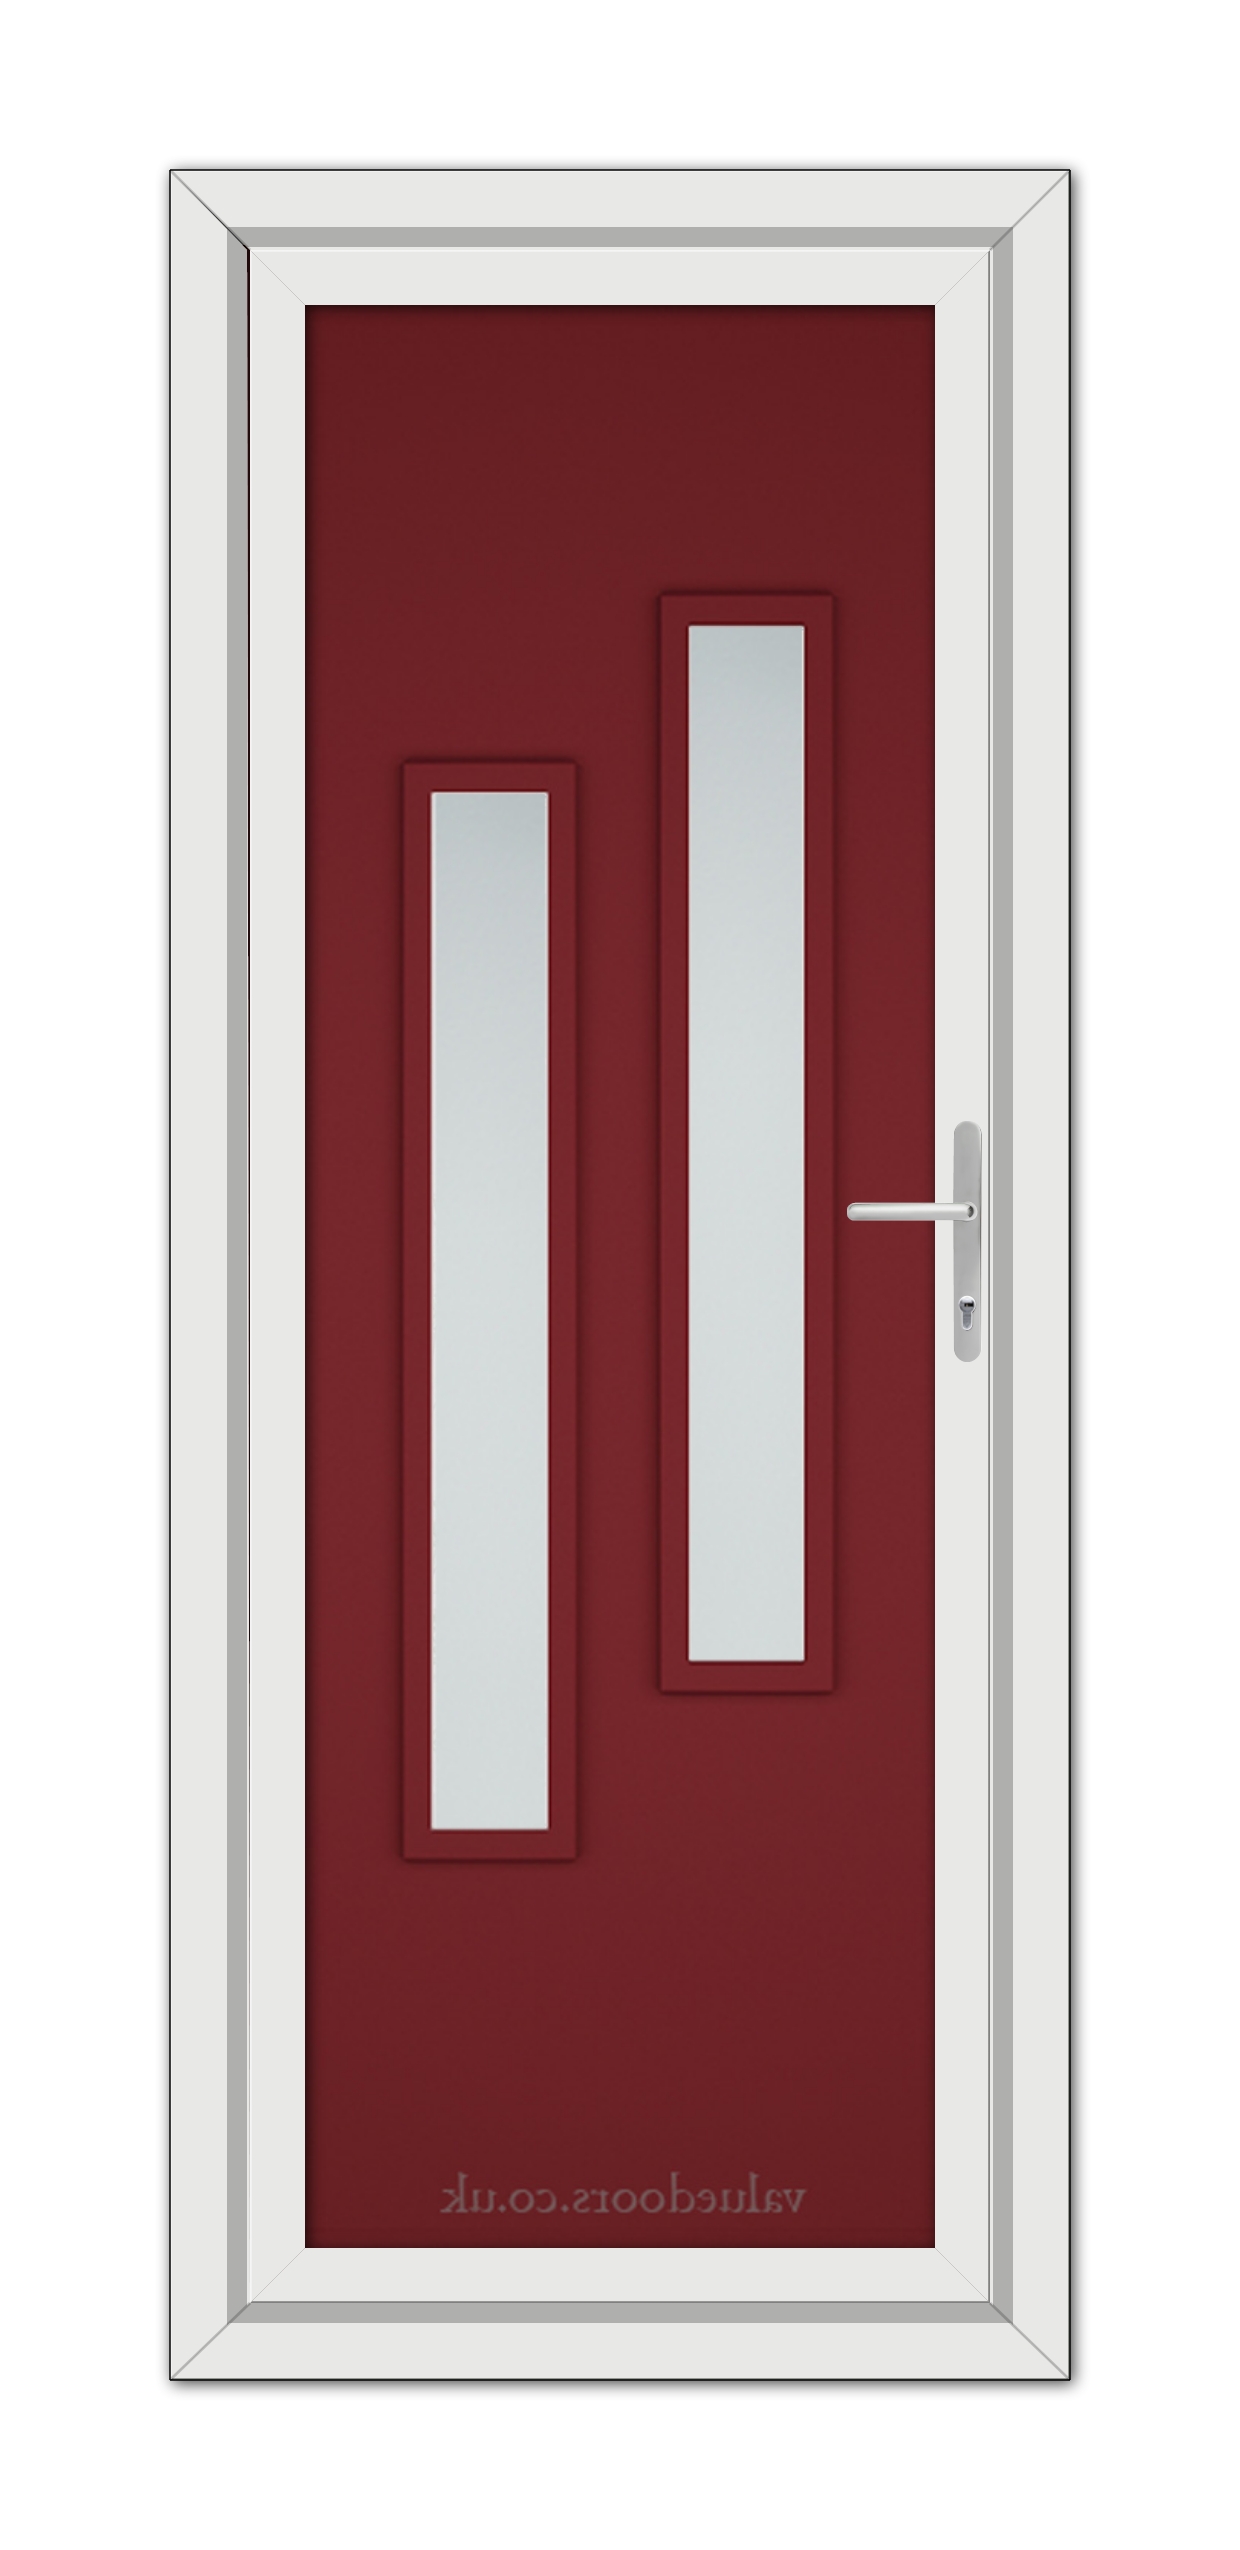 A Red Modern 5082 uPVC Door with glass panels.